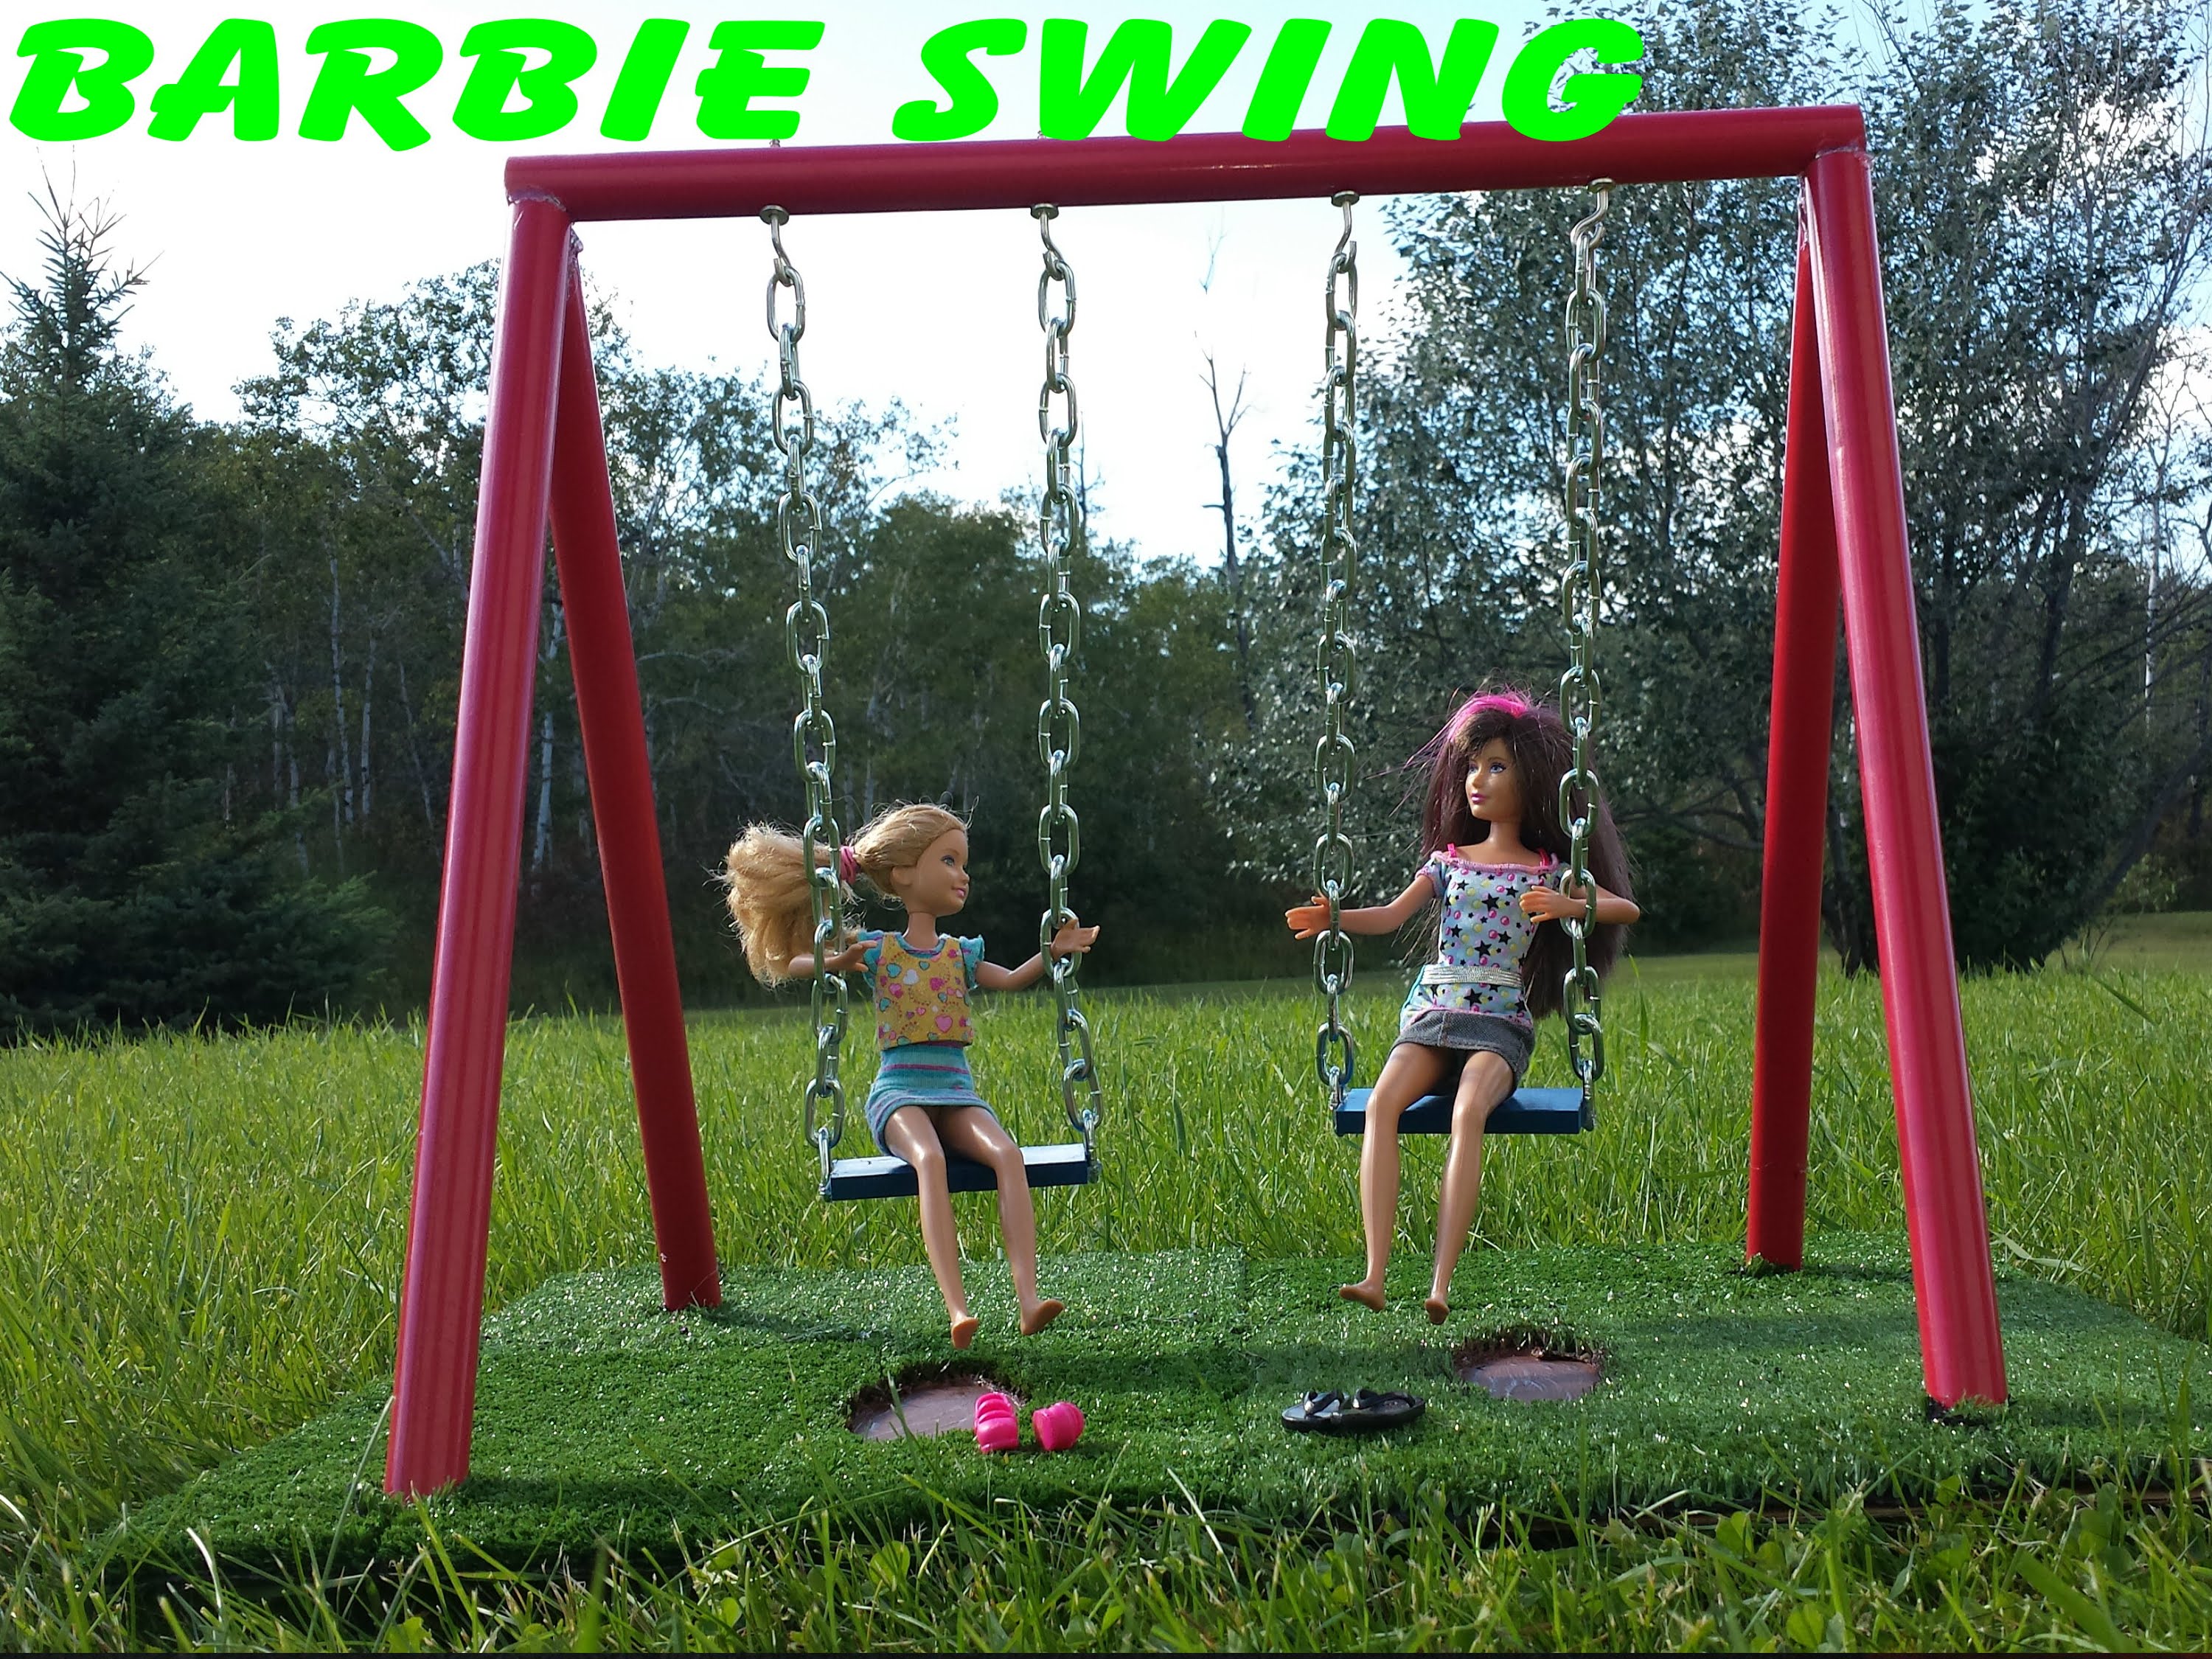 Barbie - How to make a Swing - YouTube